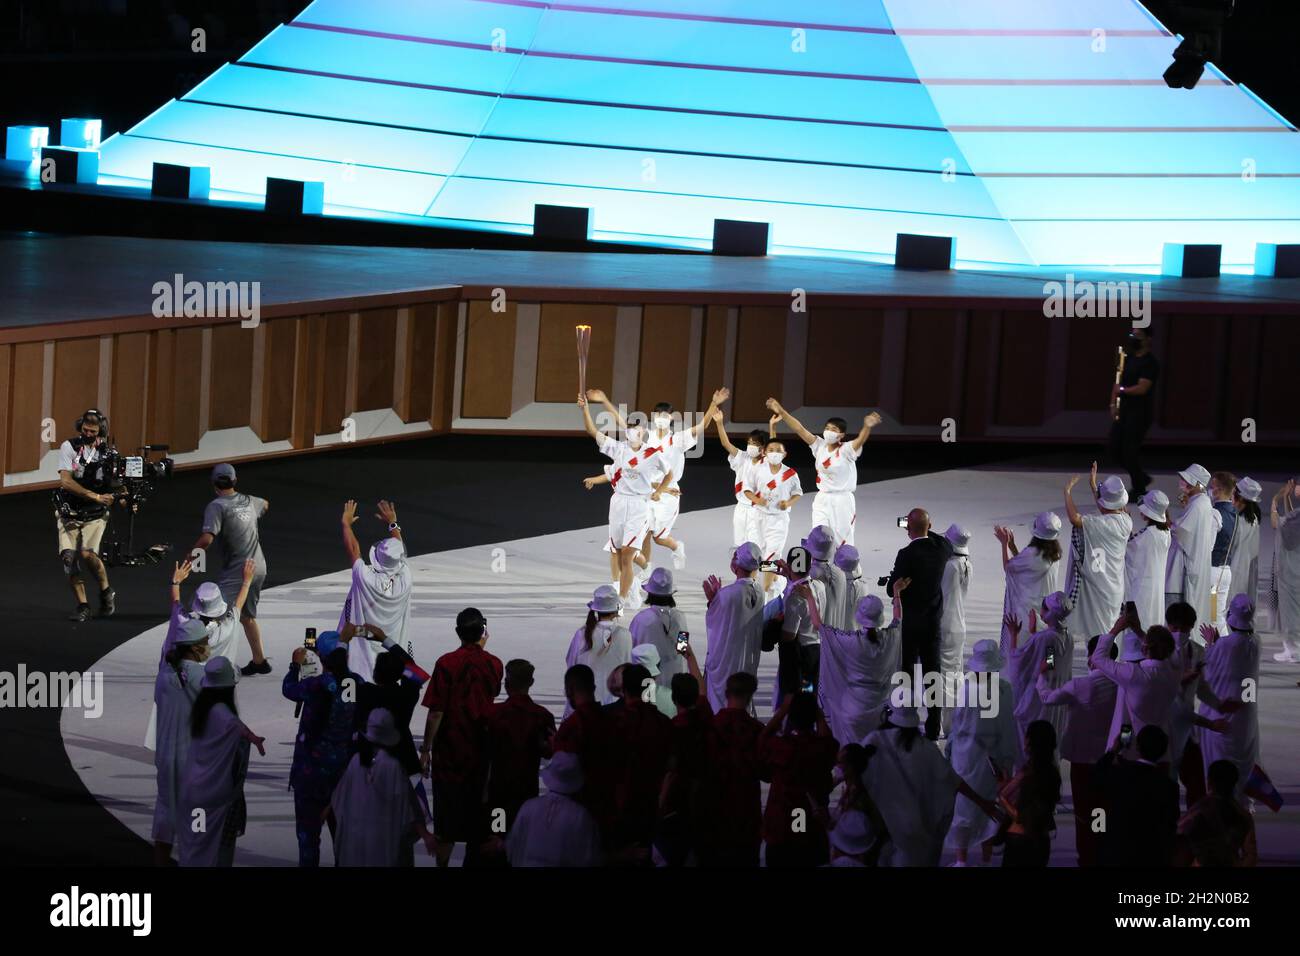 JULY 23rd, 2021 - TOKYO, JAPAN: The olympic flame is carried during the Opening Ceremony of the Tokyo 2020 Olympic Games by AOKI Kokona, NAKAZAWA Ren, Stock Photo